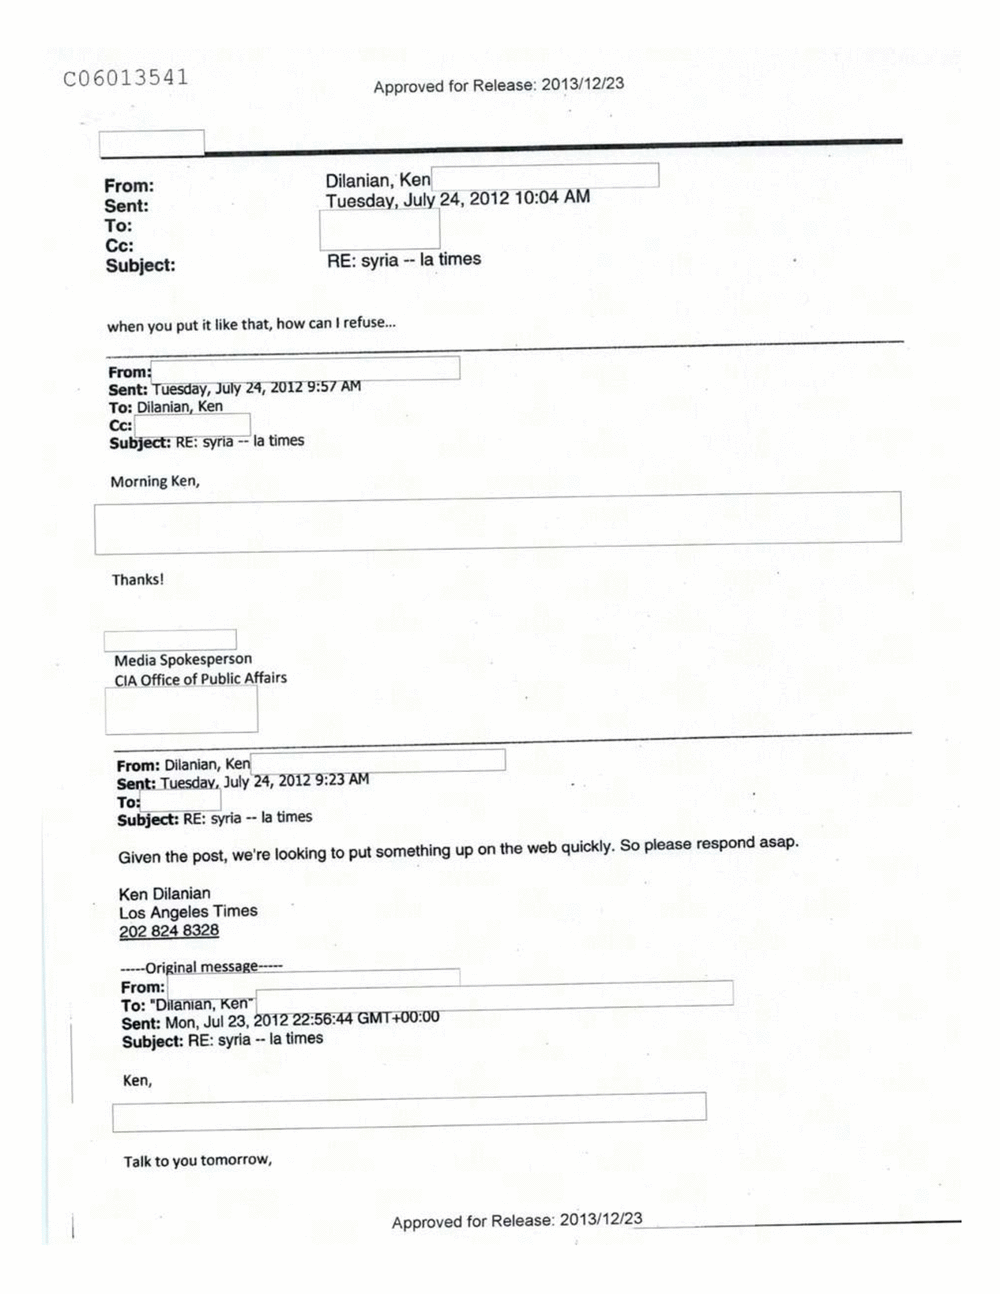 Page 396 from Email Correspondence Between Reporters and CIA Flacks